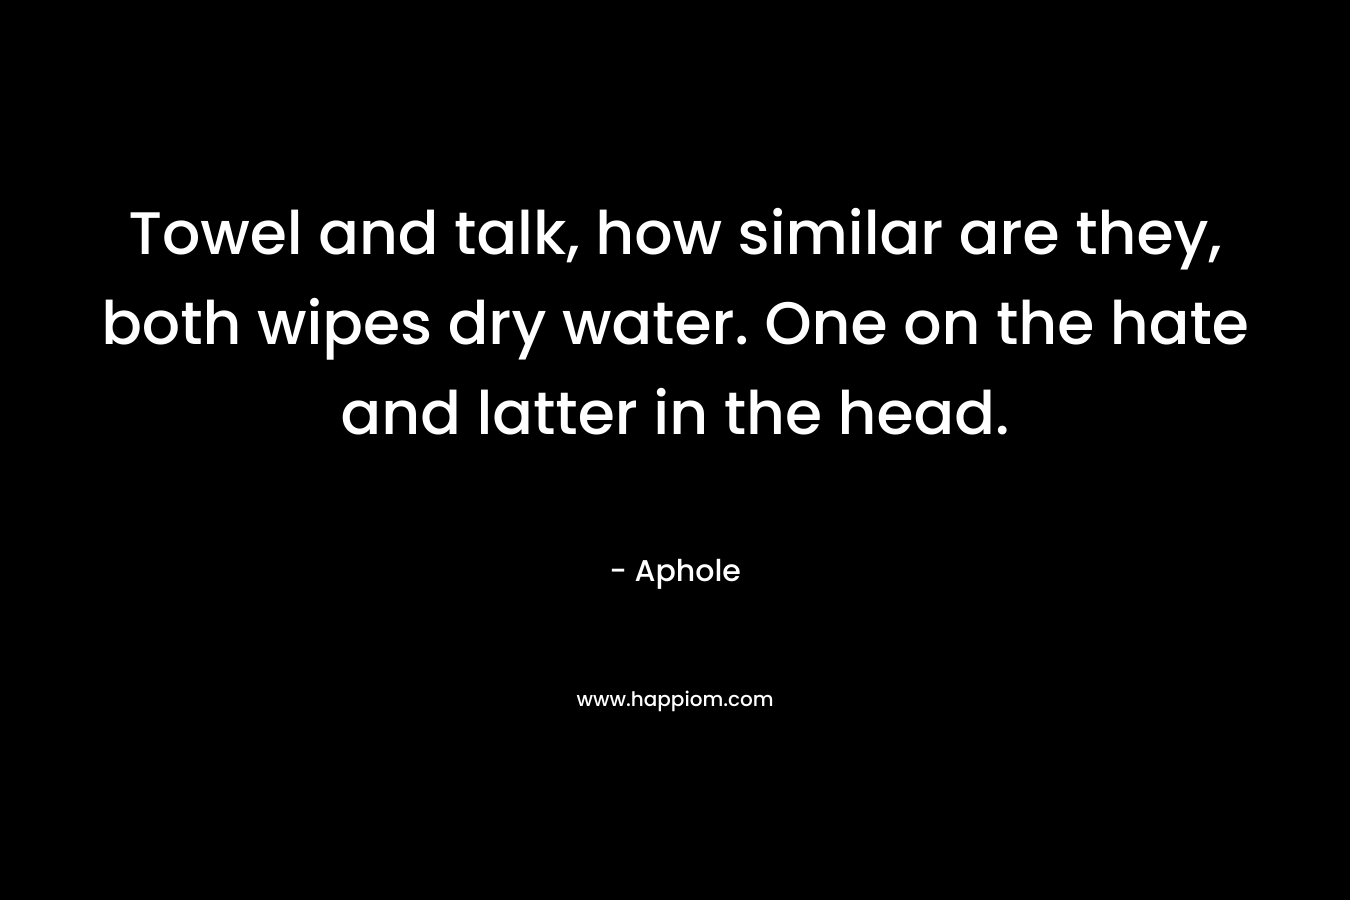 Towel and talk, how similar are they, both wipes dry water. One on the hate and latter in the head. – Aphole